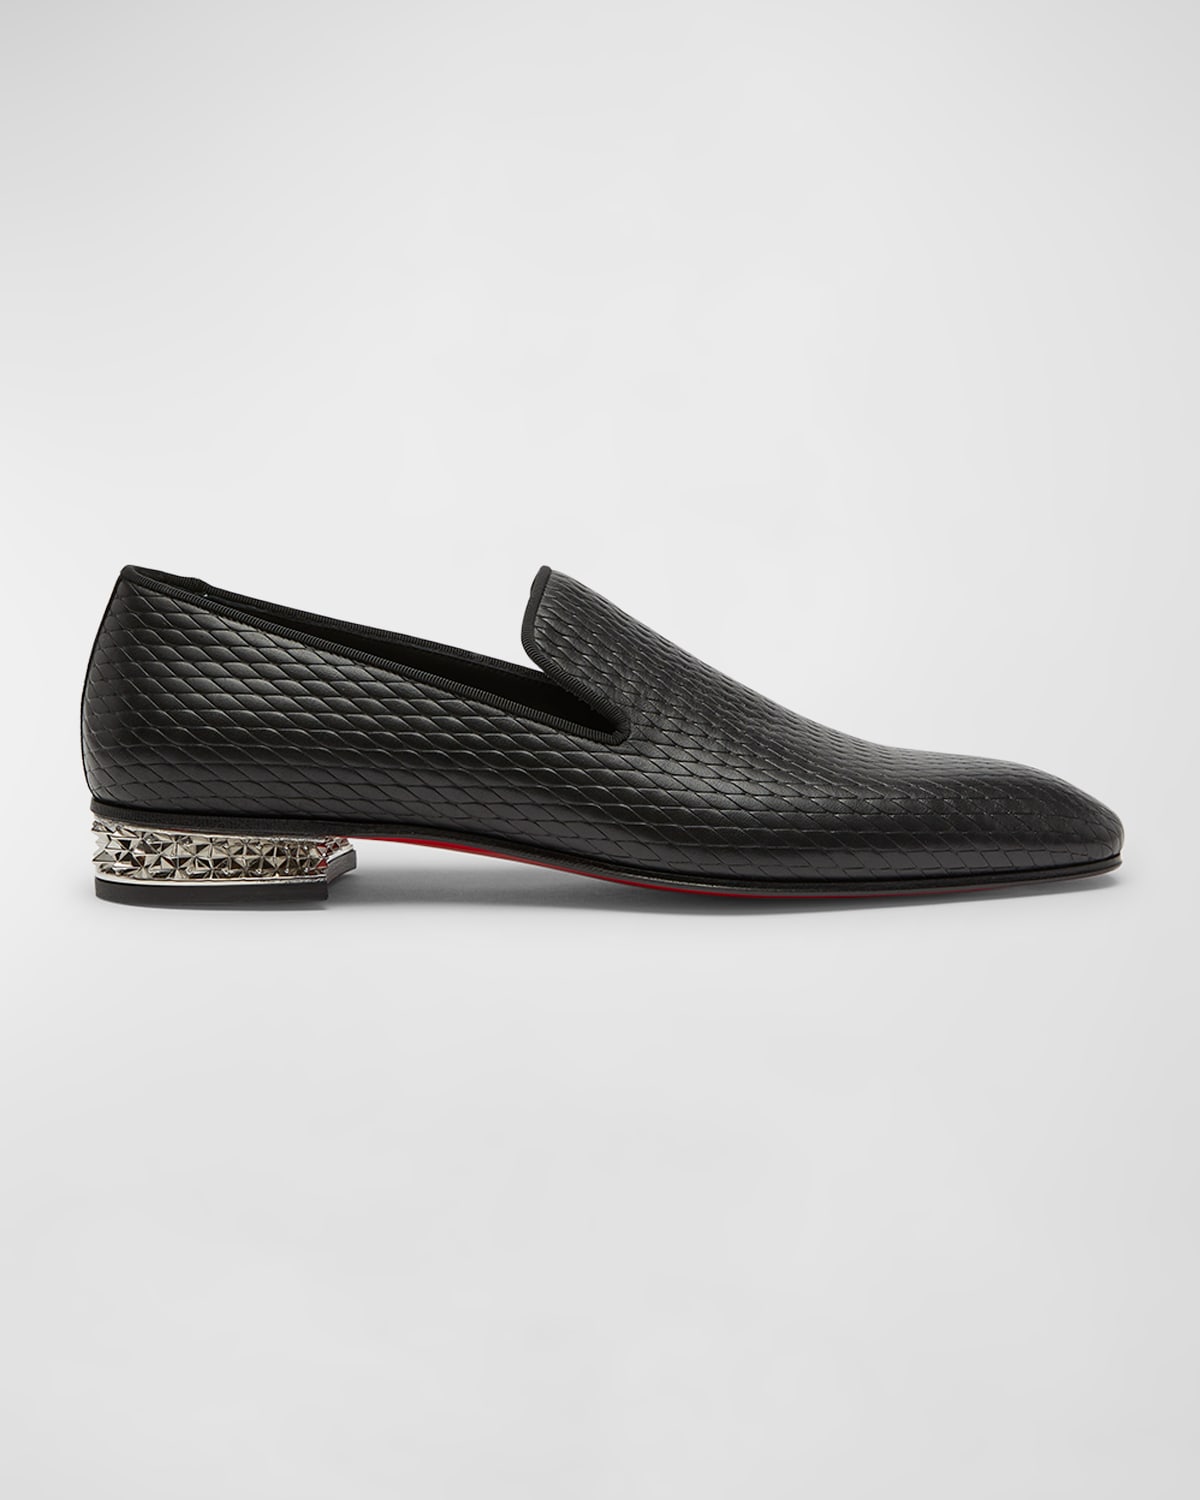 Christian Louboutin, Shoes, Christian Louboutin Dandelion Spikes Beige  Suede Men Loafers 43 Us